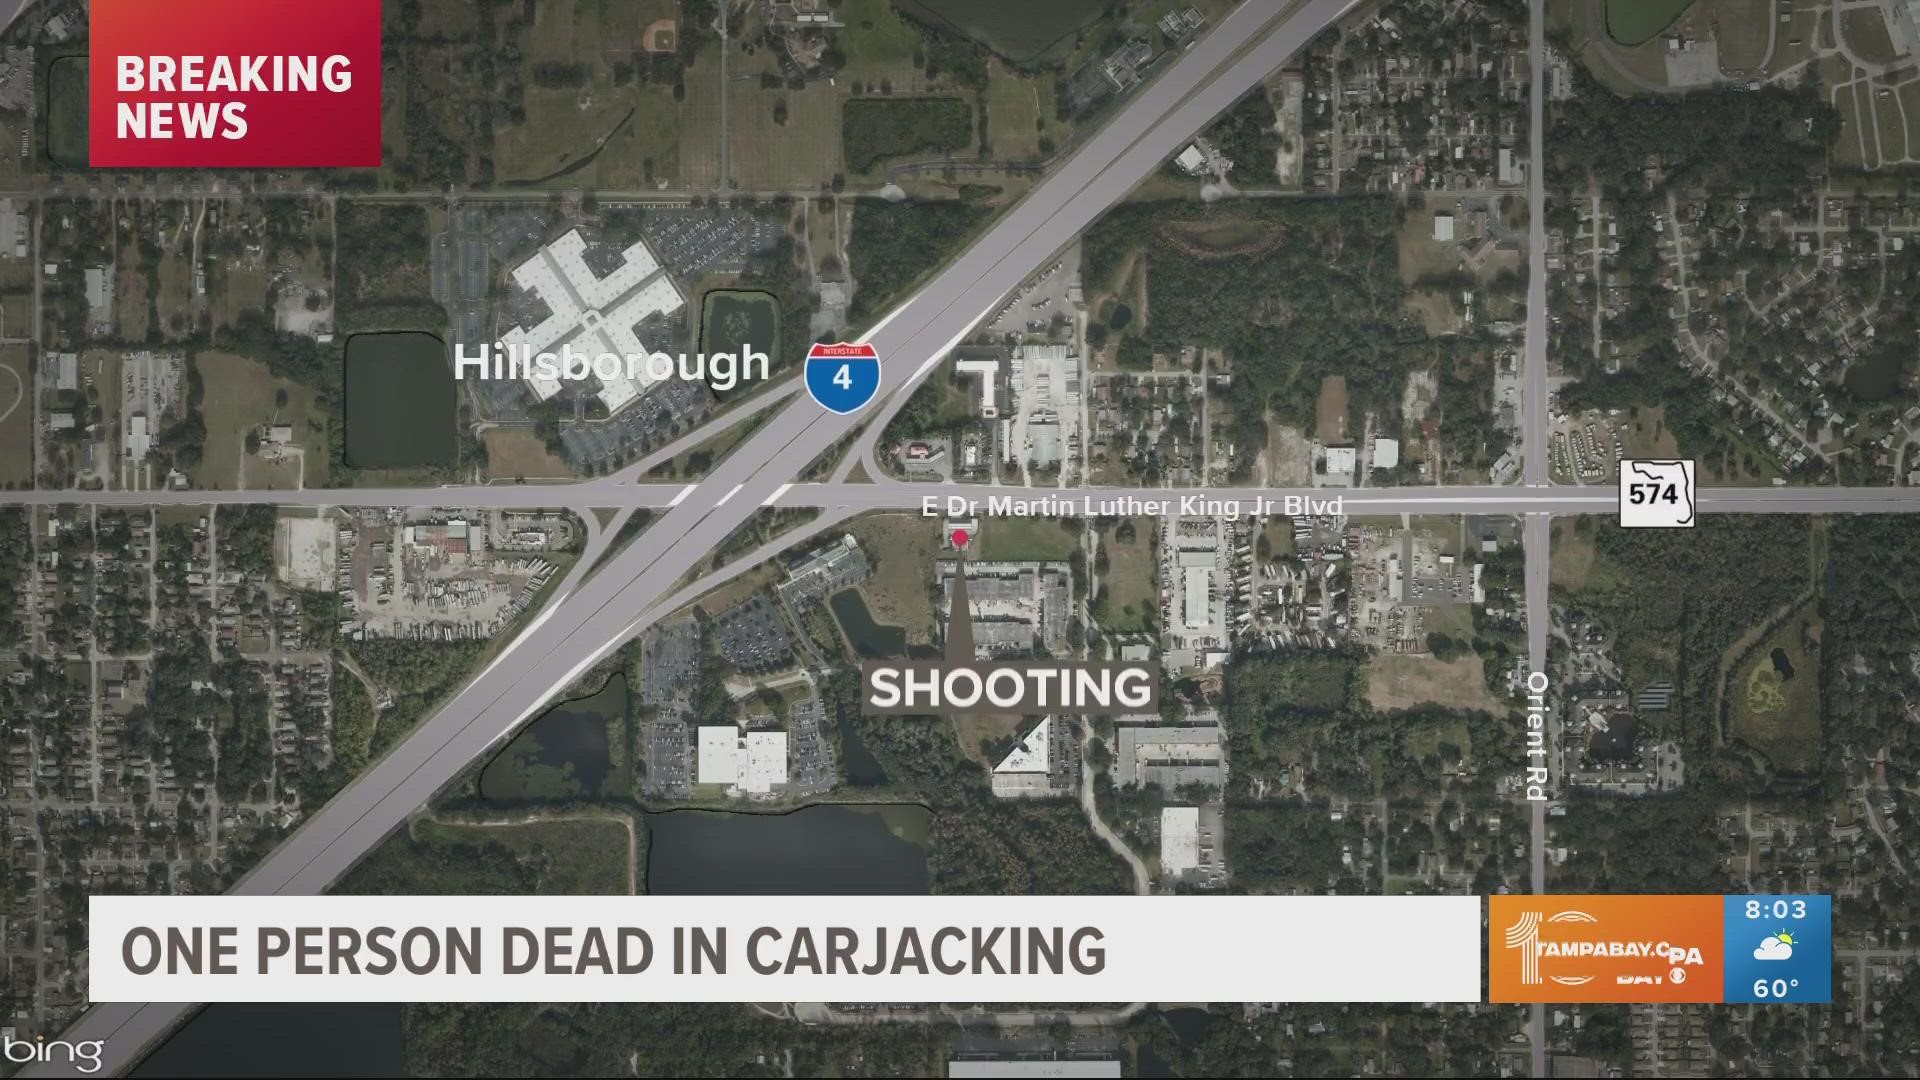 One man is dead after a late-night shooting and carjacking at a Shell gas station in Tampa, the Hillsborough County Sheriff's Office said.